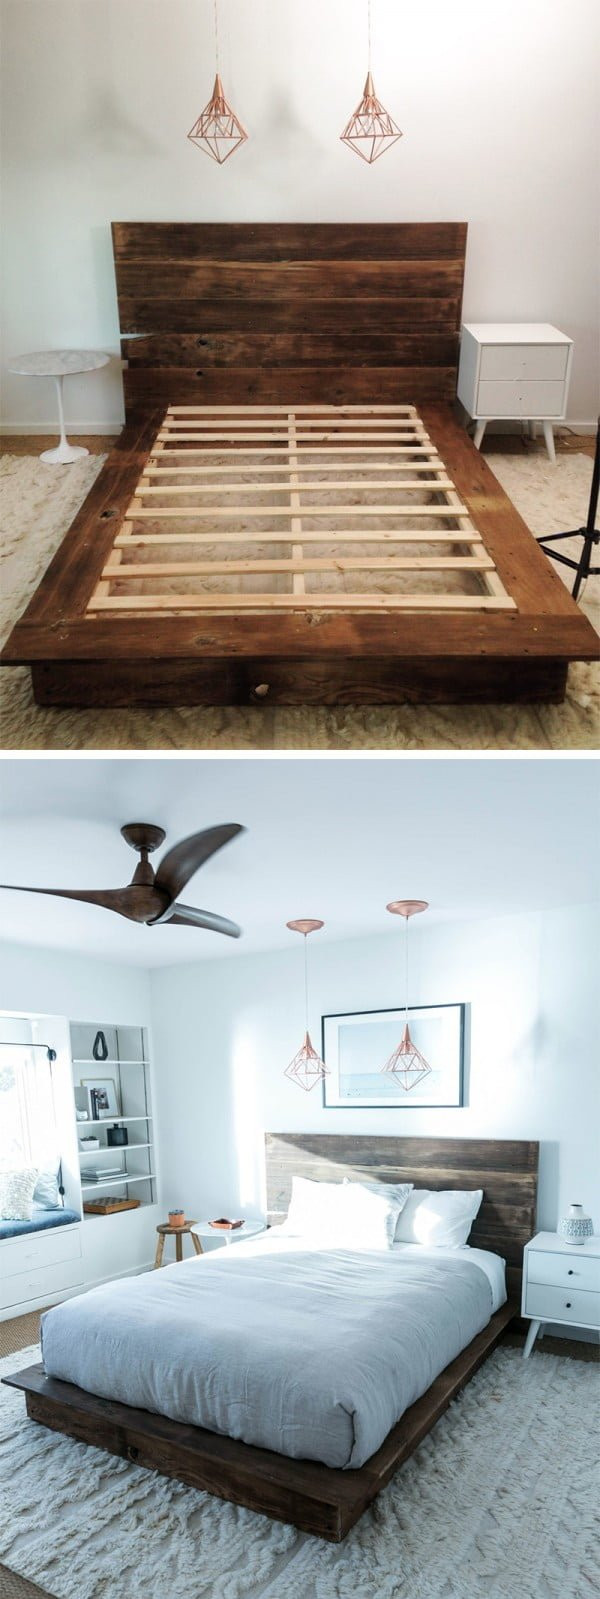 Simple Wood Bed Frame DIY
 45 Easy DIY Bed Frame Projects You Can Build on a Bud